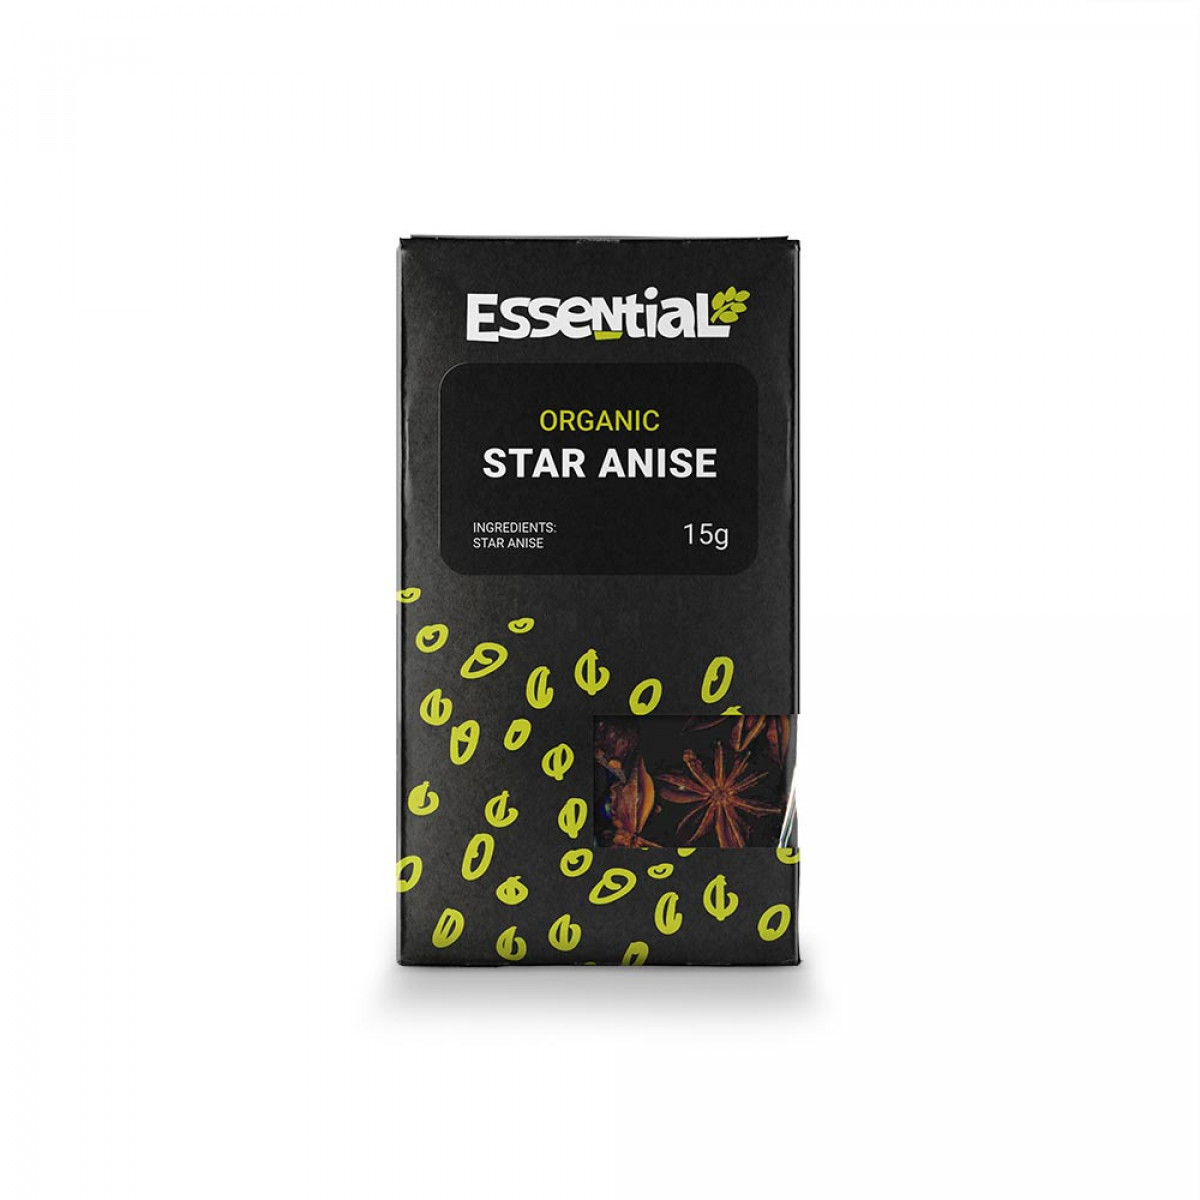 Product picture for Star Anise